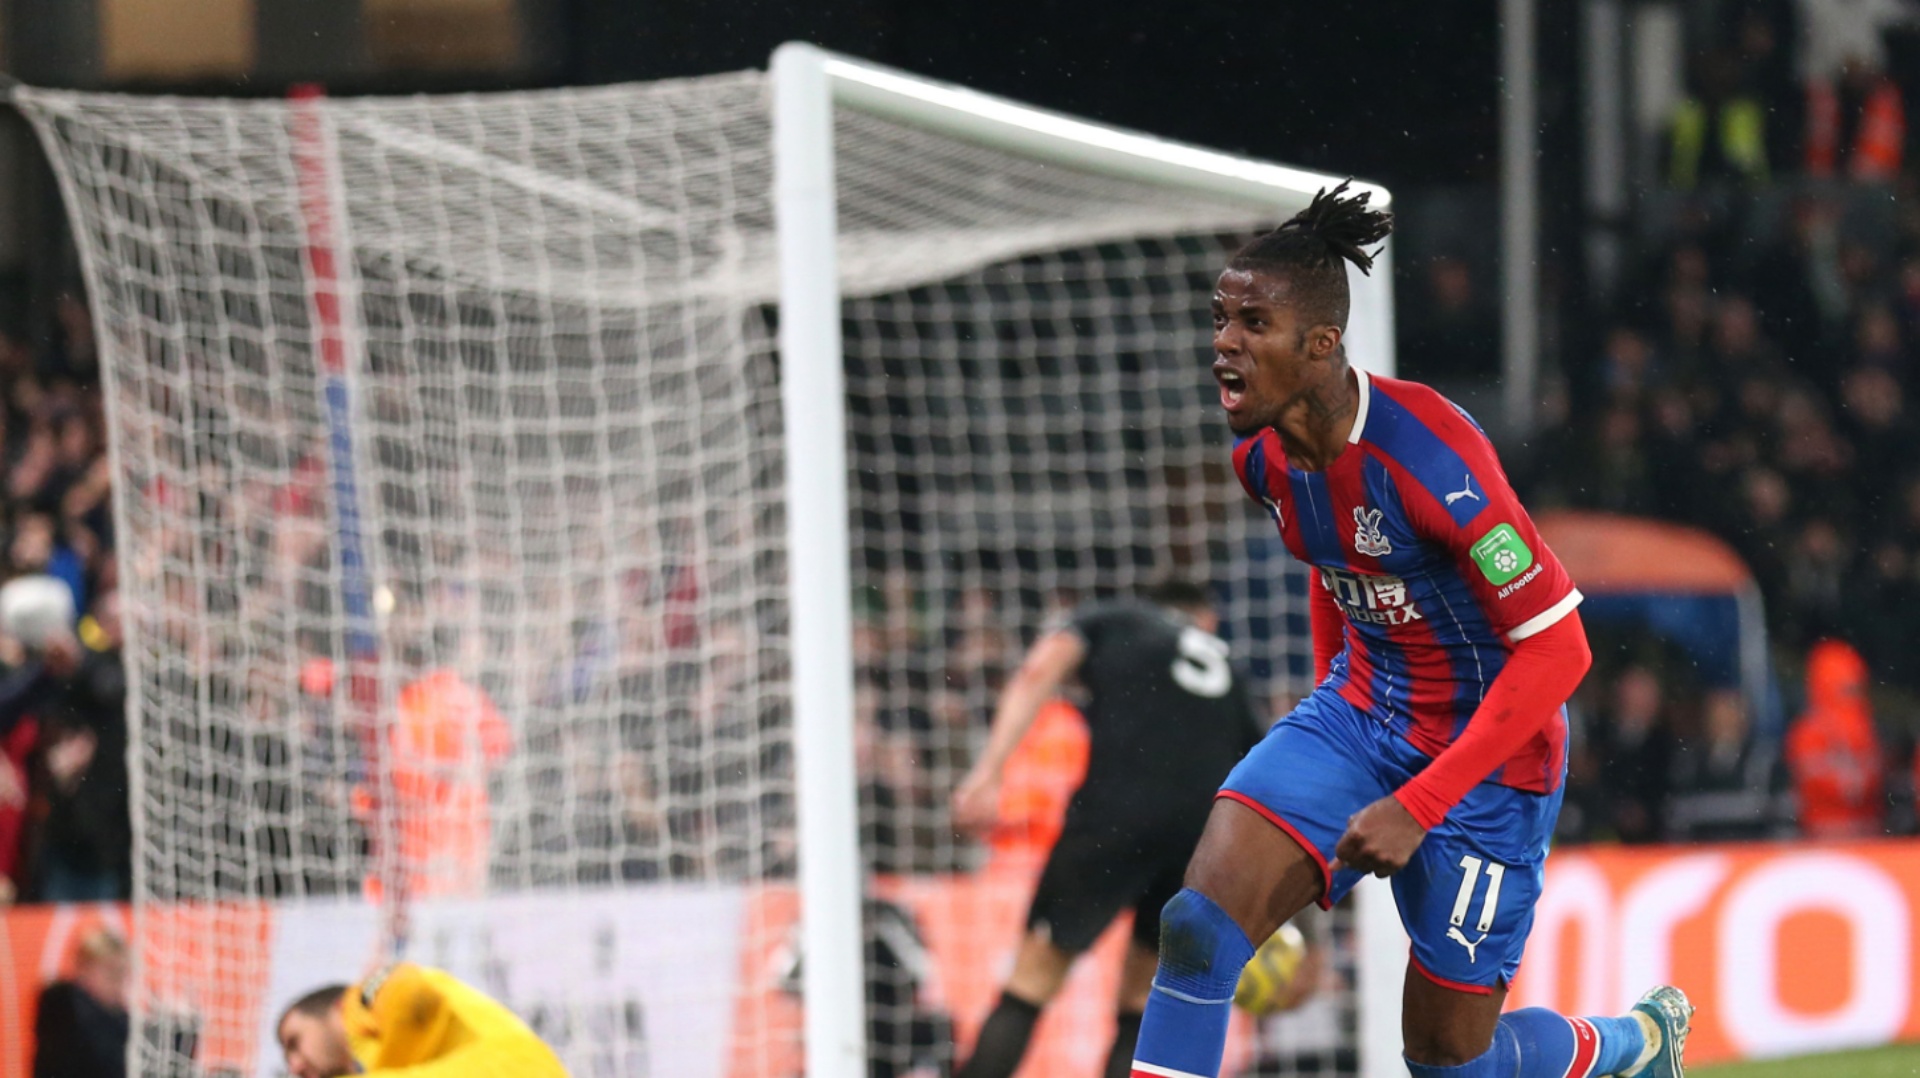 Arsenal transfer targets: Zaha, Boateng & players linked with the club